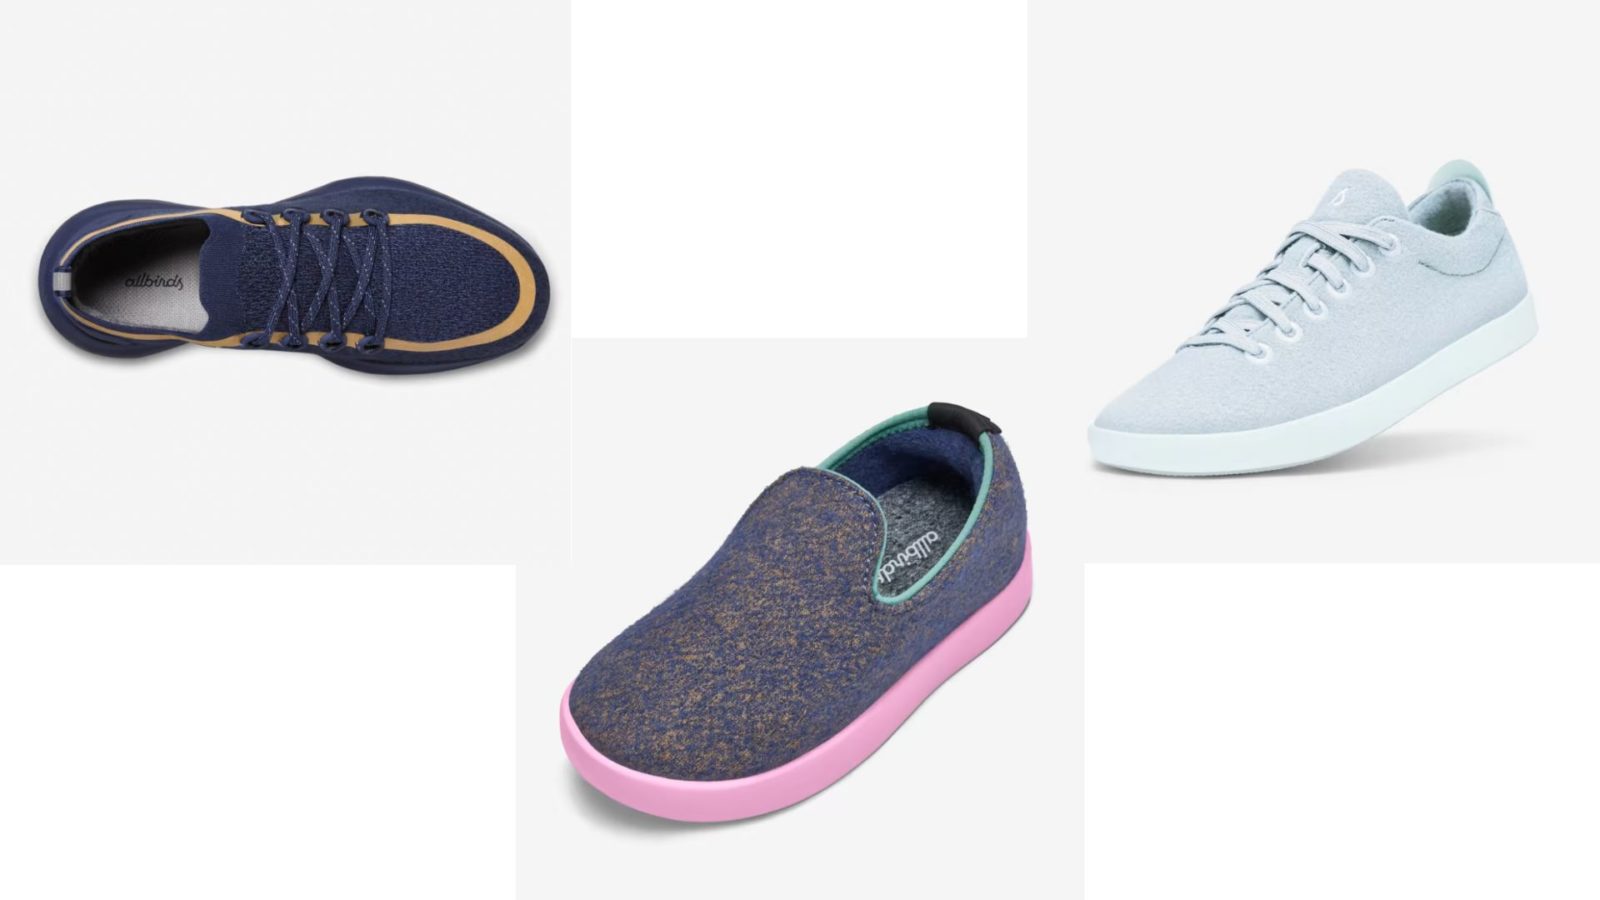 Three pairs of Allbirds shoes that are great for travel